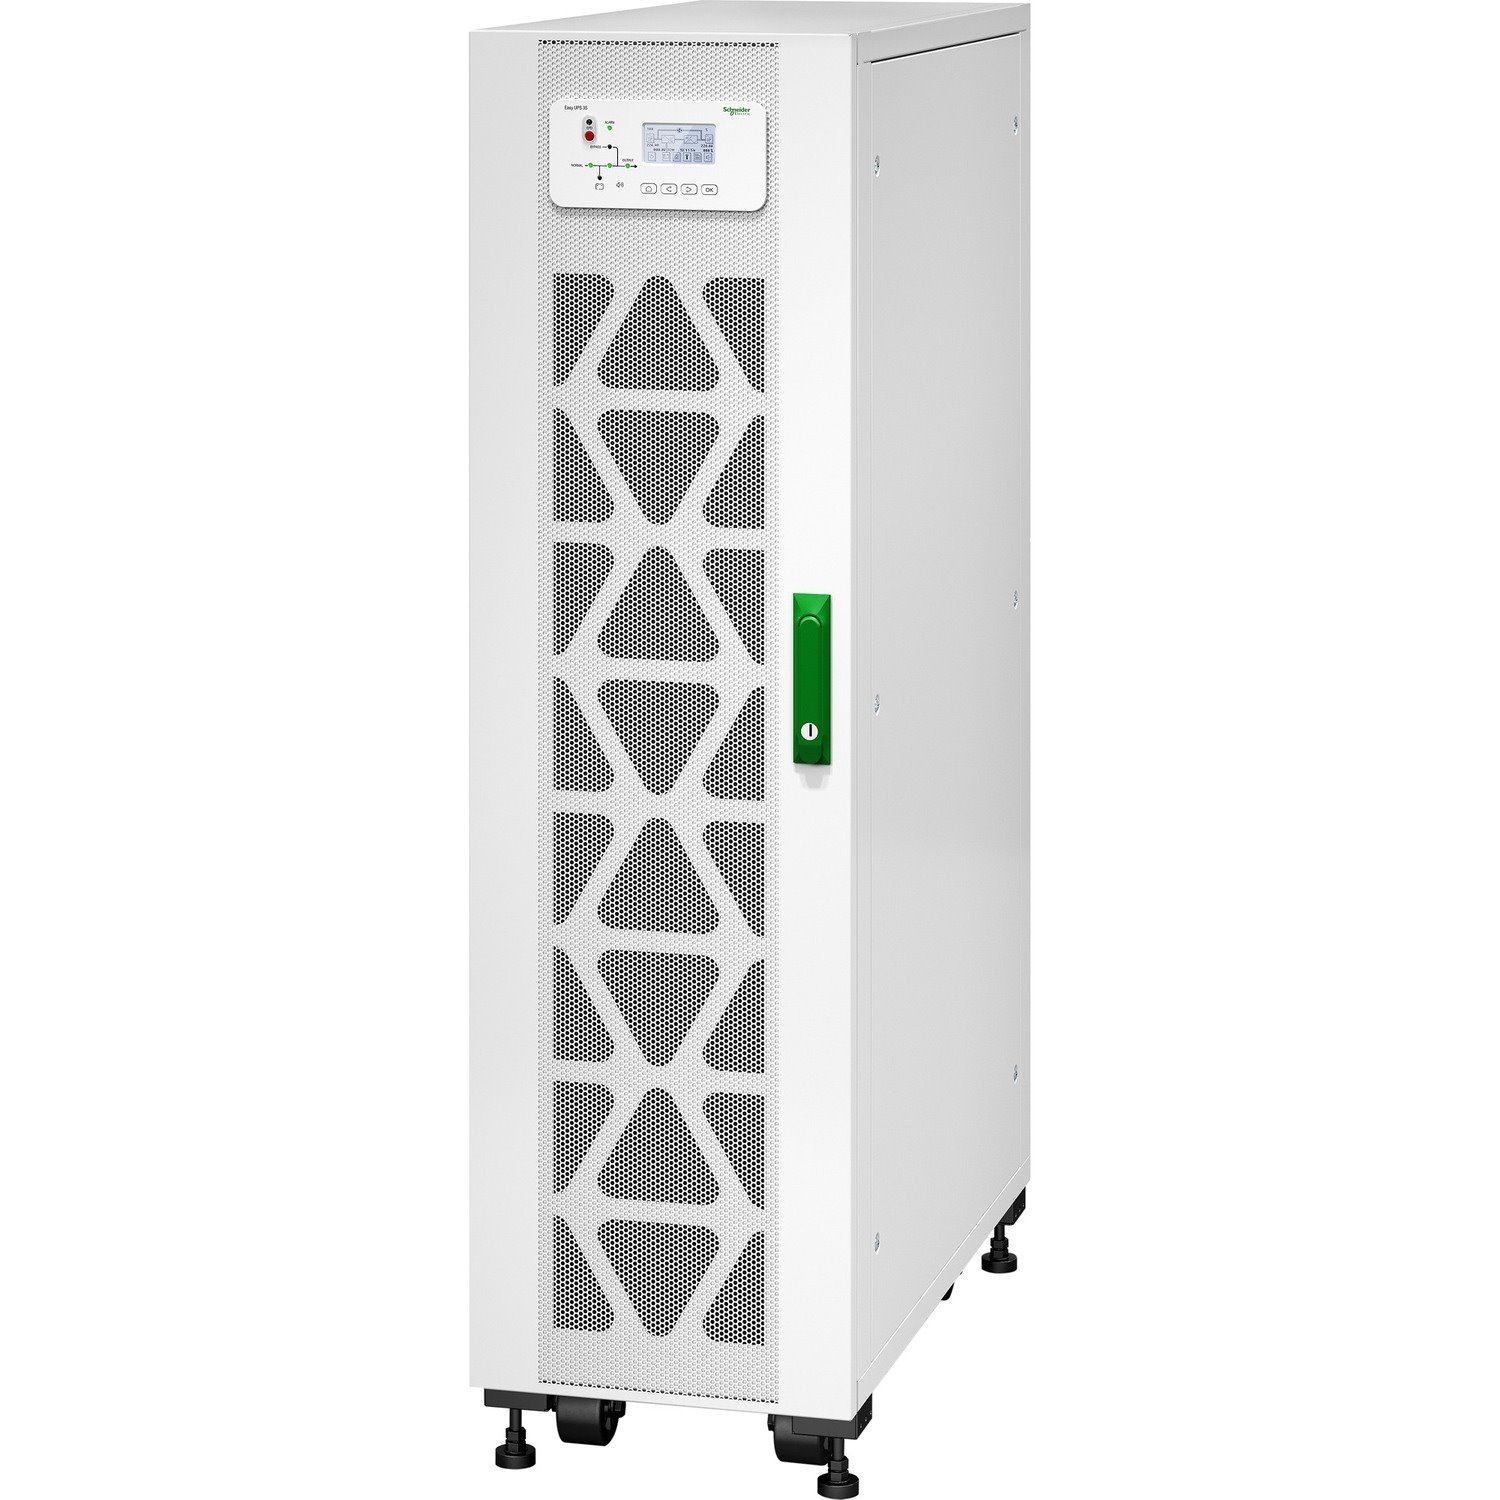 APC by Schneider Electric Easy UPS 3S Dual Conversion Online UPS - 10 kVA - Three Phase